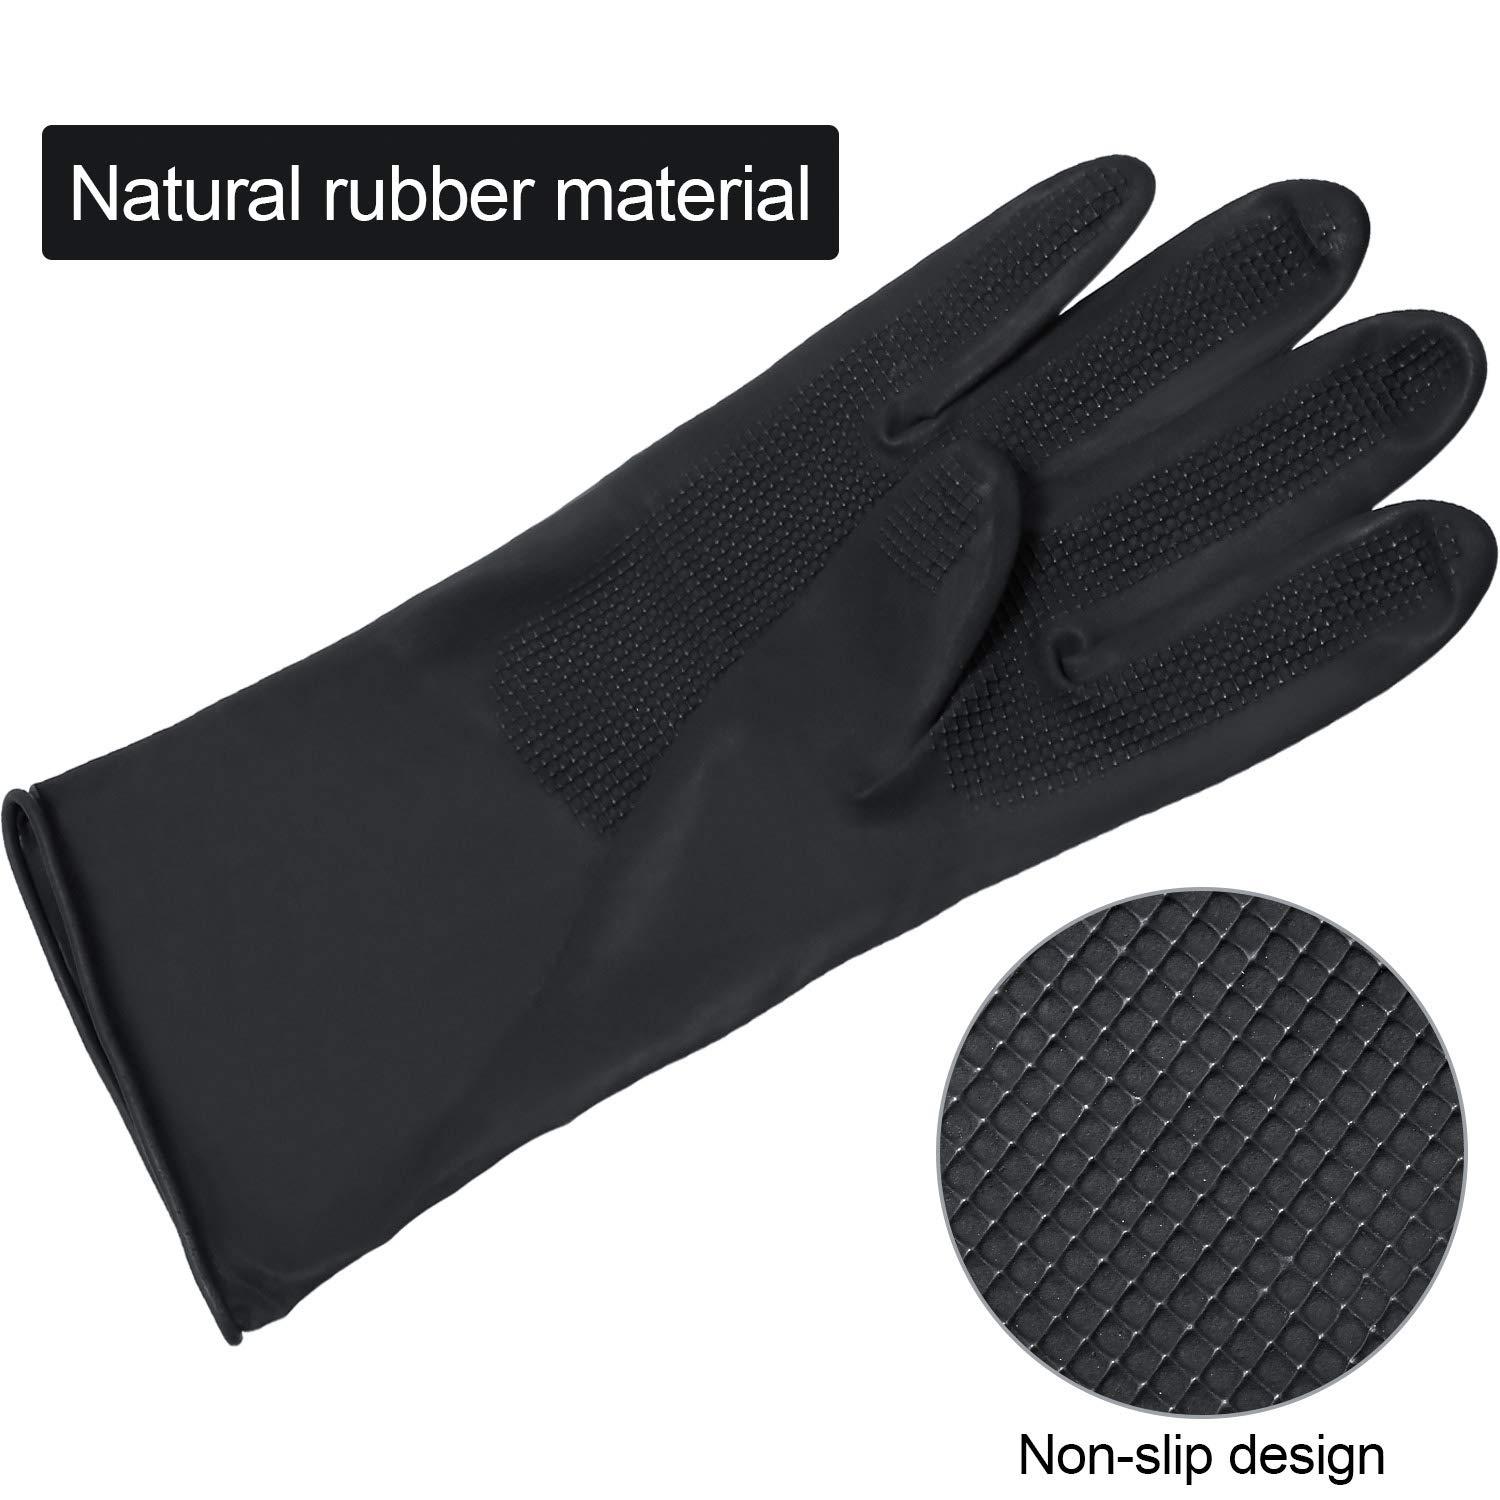 6 Pairs Hair Dye Gloves Reusable Anti-skid Hair Color Gloves Thick  Waterproof Rubber Gloves Professional Hair Dye Accessories for Home Salon,  Black, Large